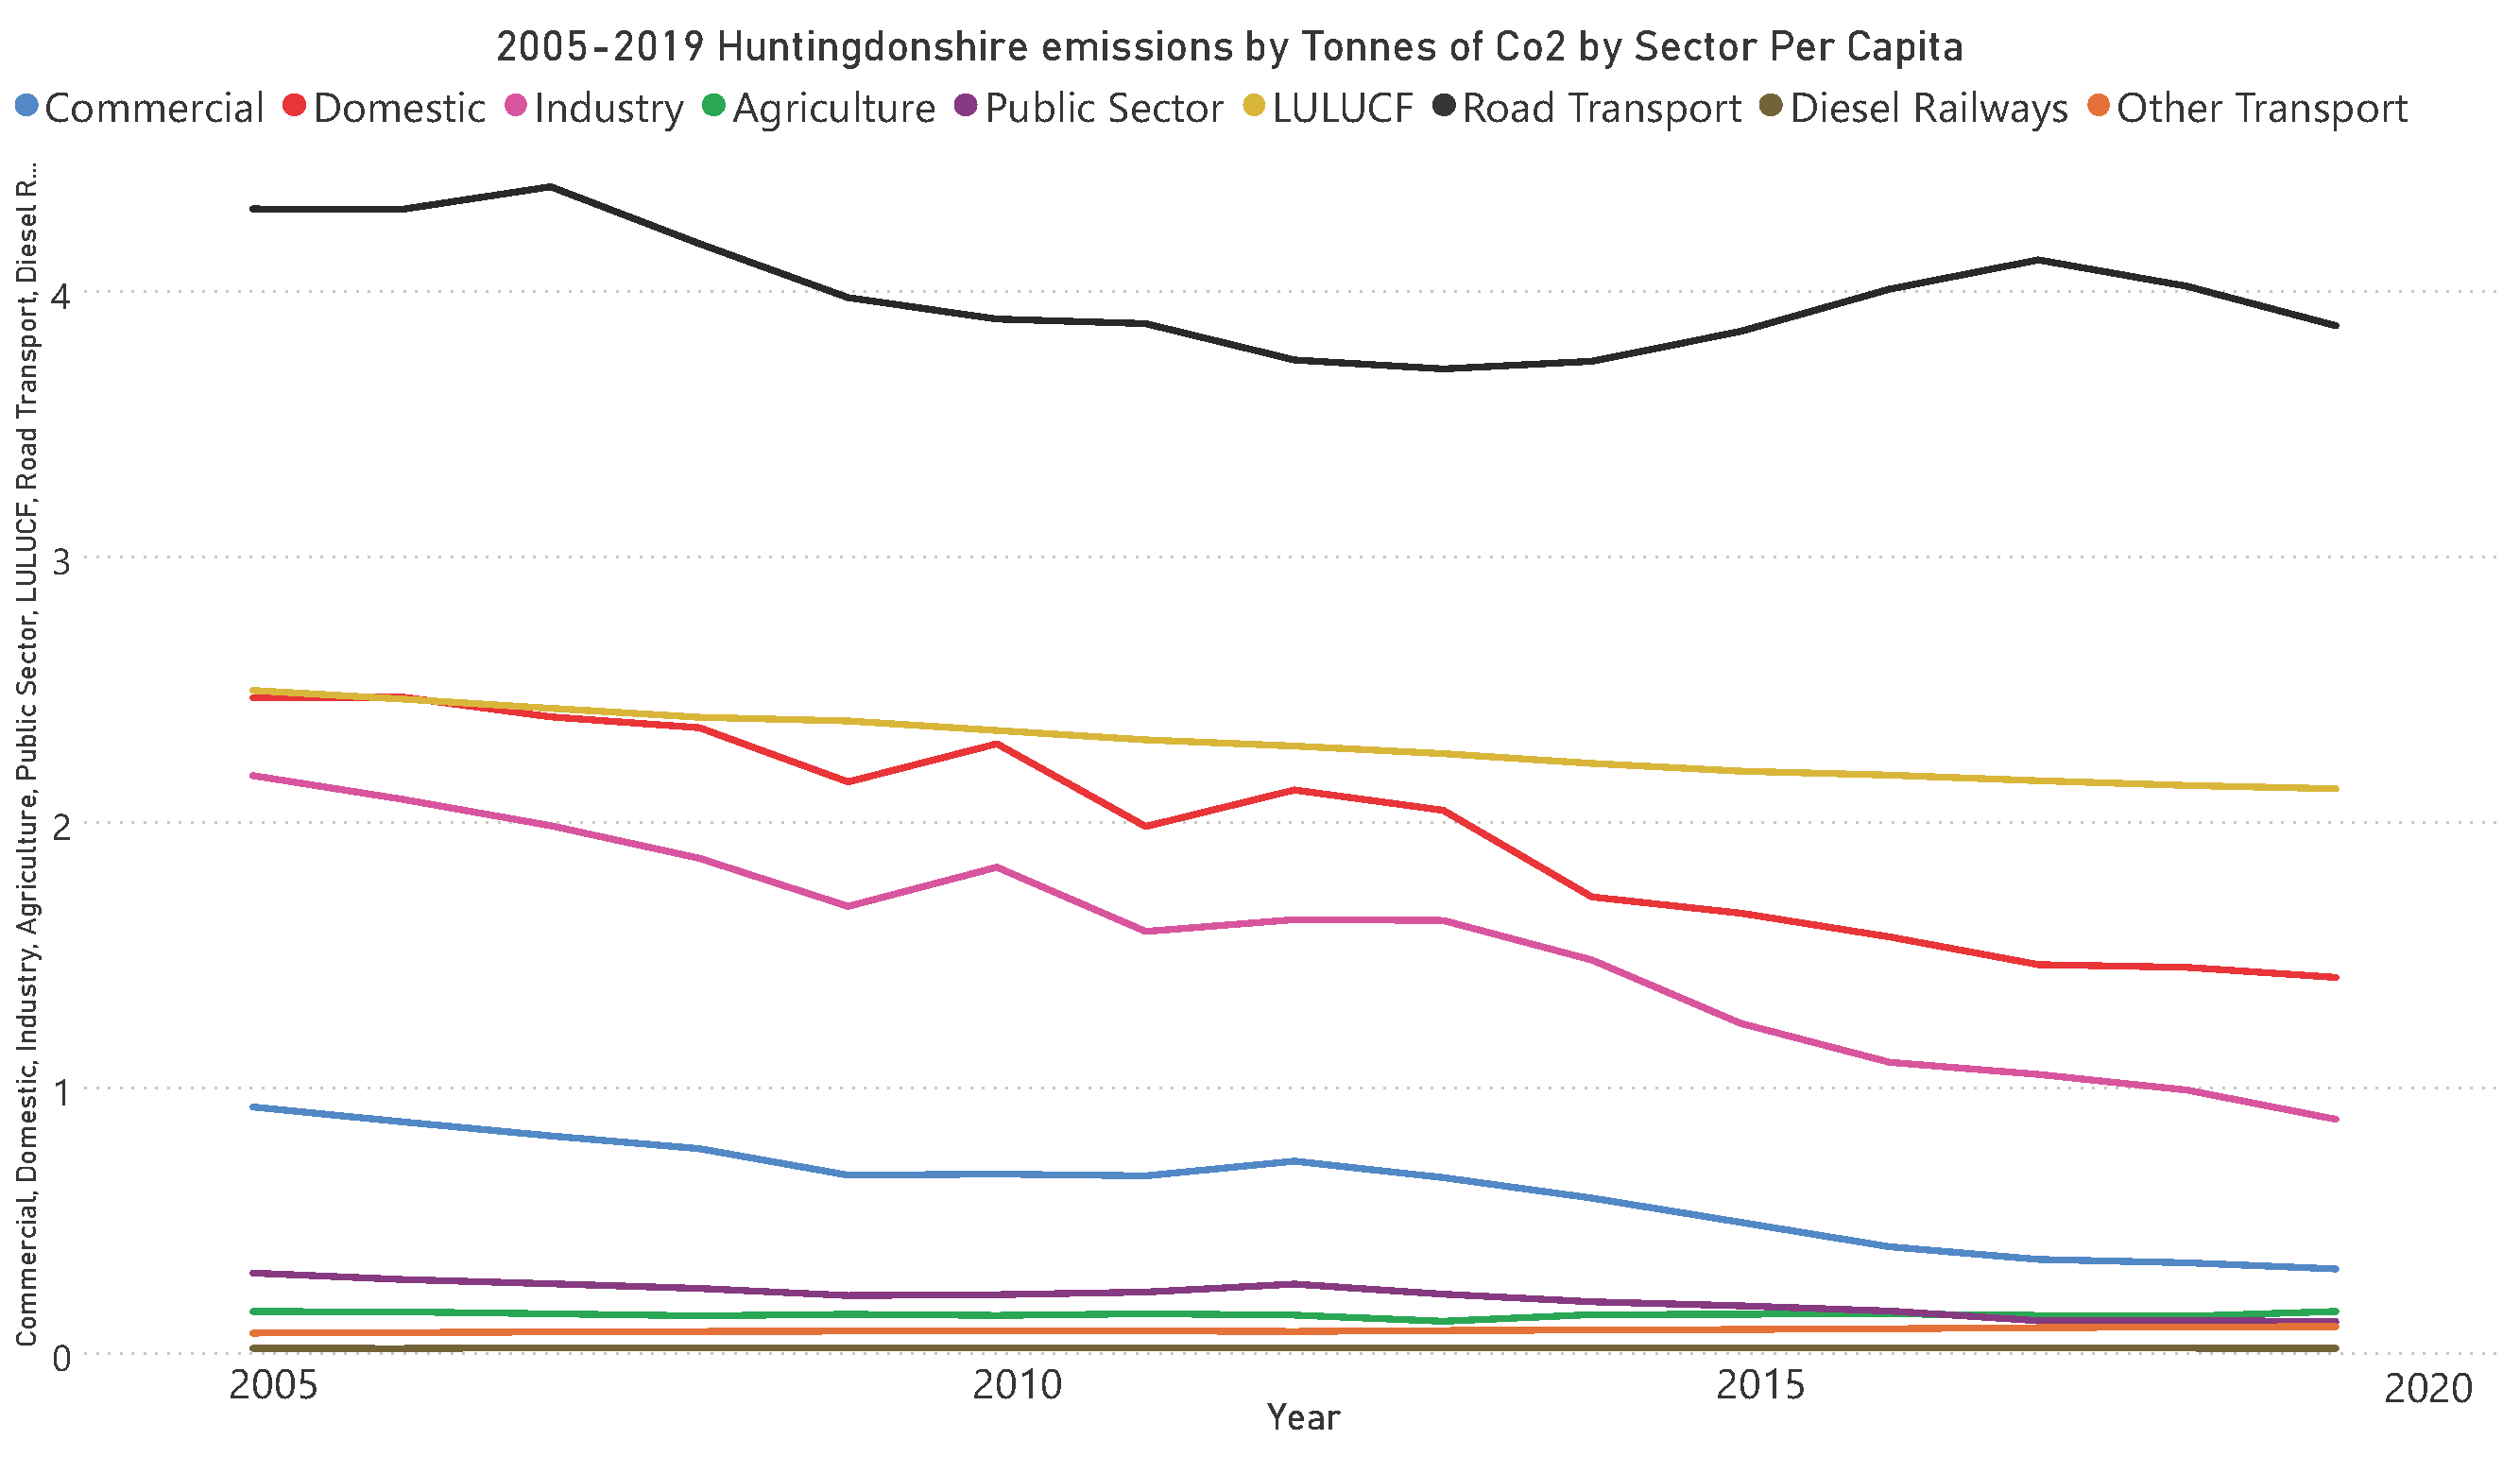 Huntingdonshire co2 emissions by sector per capita from 2005-2019.  Road Transport. 2005 4.31 tonnes co2 per person, 2019 3.87 tonnes co2 per person  LULUCF. 2005 2.49 tonnes co2 per person, 2019 2.12 tonnes co2 per person  Domestic. 2005 2.47 tonnes co2 per person, 2019 1.41 tonnes co2 per person  Industry. 2005 2.17 tonnes co2 per person, 2019 0.88 tonnes co2 per person  Commercial. 2005 0.92 tonnes of co2 per person, 2019 0.31 tonnes of co2 per person  Public sector. 2005 0.30 tonnes of co2 per person, 2019 0.12 tonnes of co2 per person  Agriculture. 2005 0.15 tonnes of co2 per person, 2019 0.15 tonnes of co2 per person  Other Transport. 2005 0.07 tonnes of co2 per person, 2019 0.1 tonnes of co2 per person  Diesel Railways. 2005 0.01 tonnes of co2 per person, 2019 0.02 tonnes of co2 per person